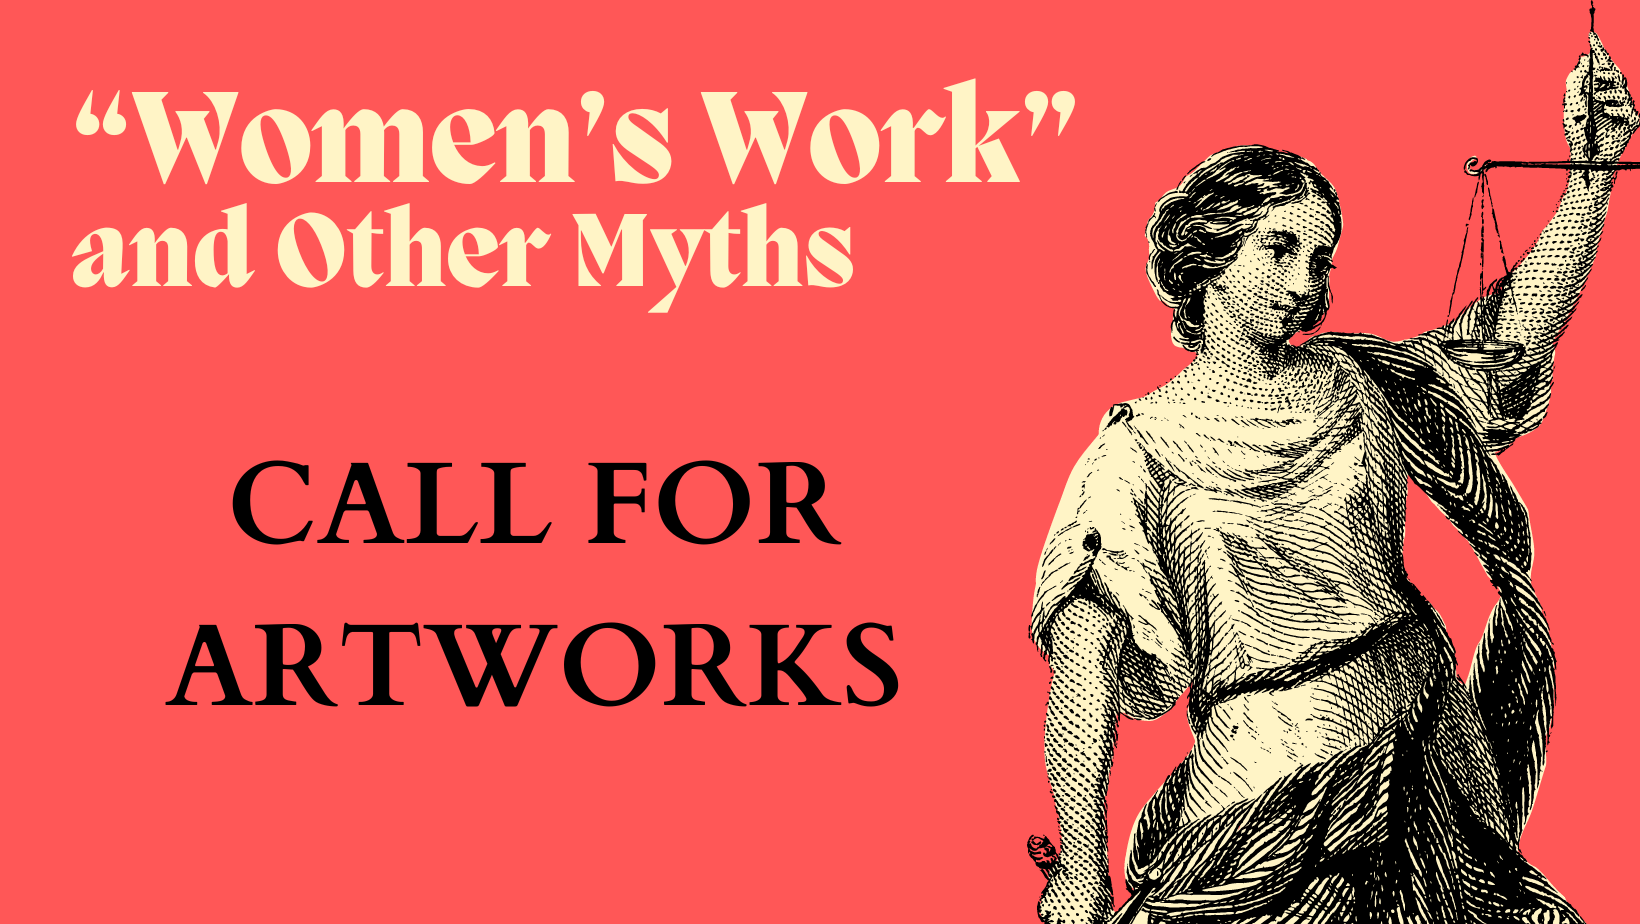 Womens work and other myths - call for artworks